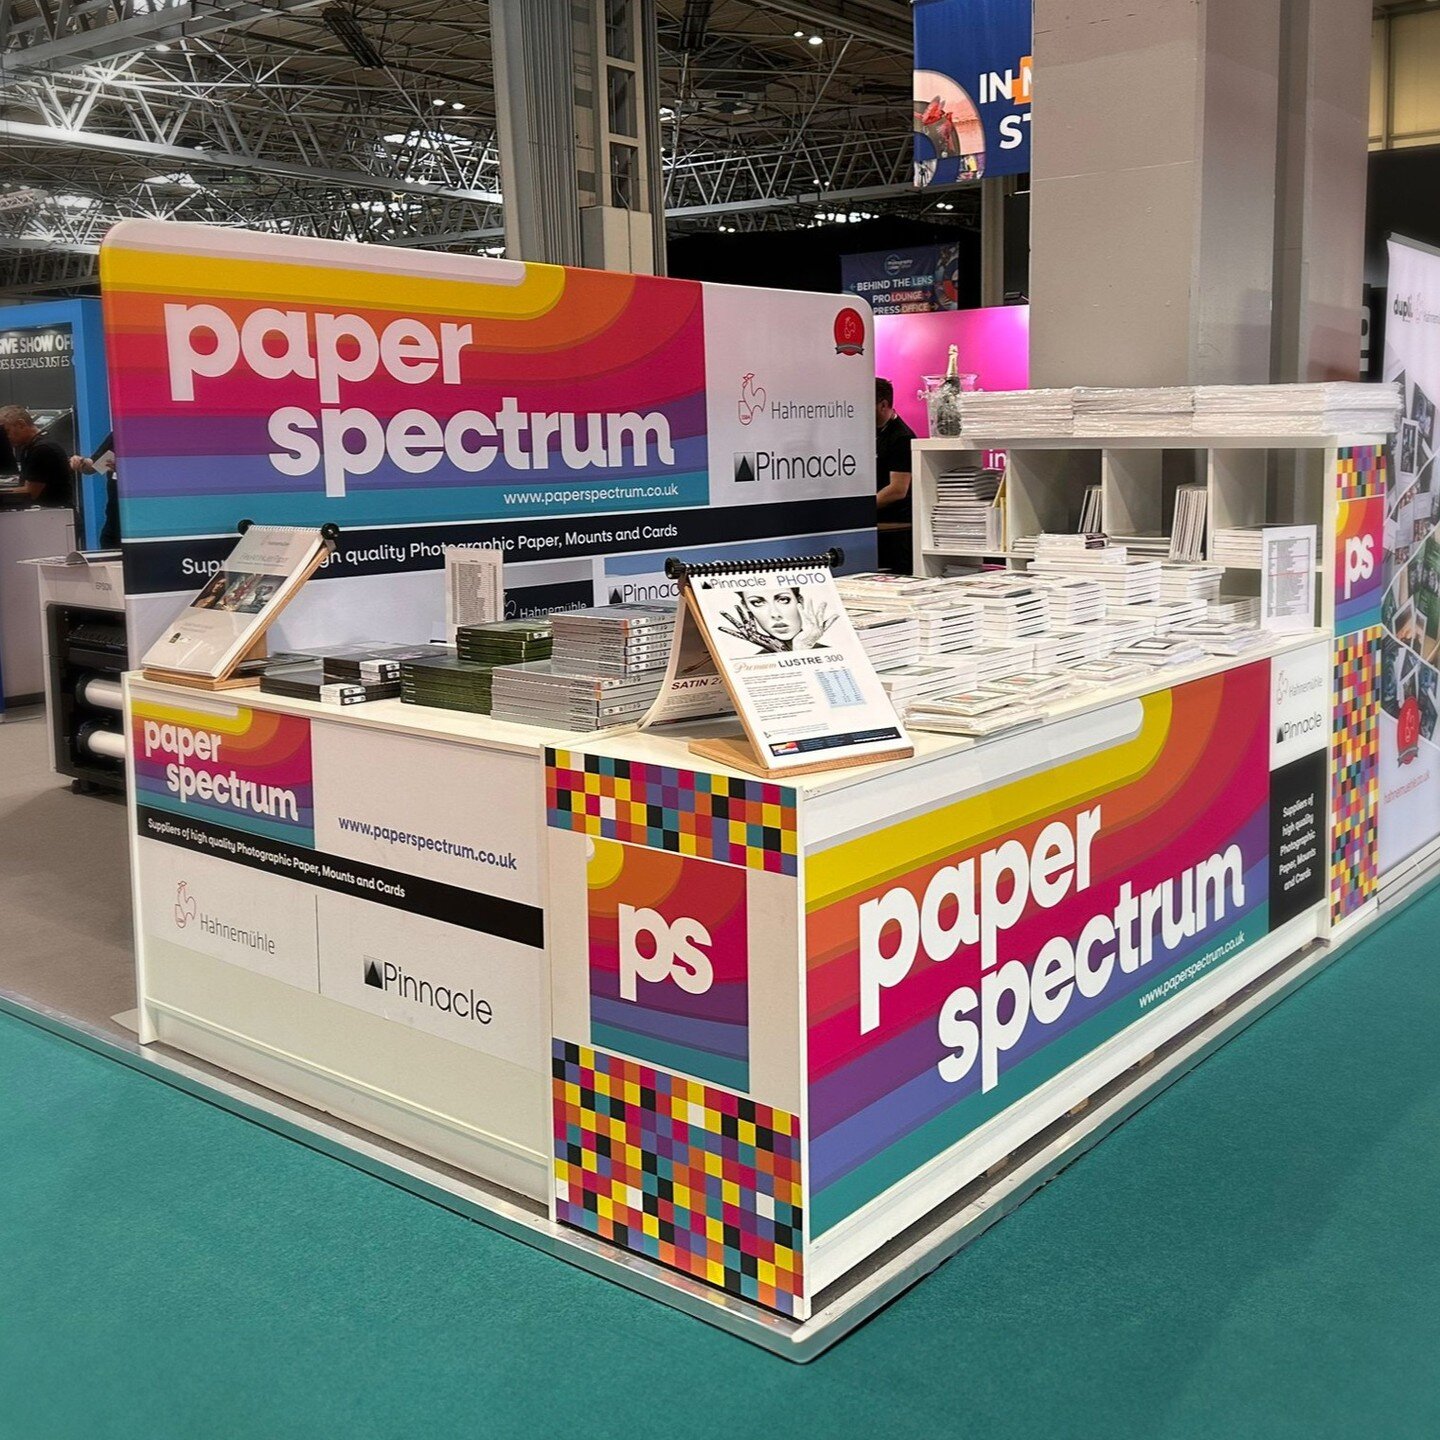 It is so good to see the branding work I did for Paper Spectrum in use at The Photography and Video Show!

You can read more about the work I did in the Case Studies section of my website.

#logodesigner #logodesign #rebranding #rebrand #photographya